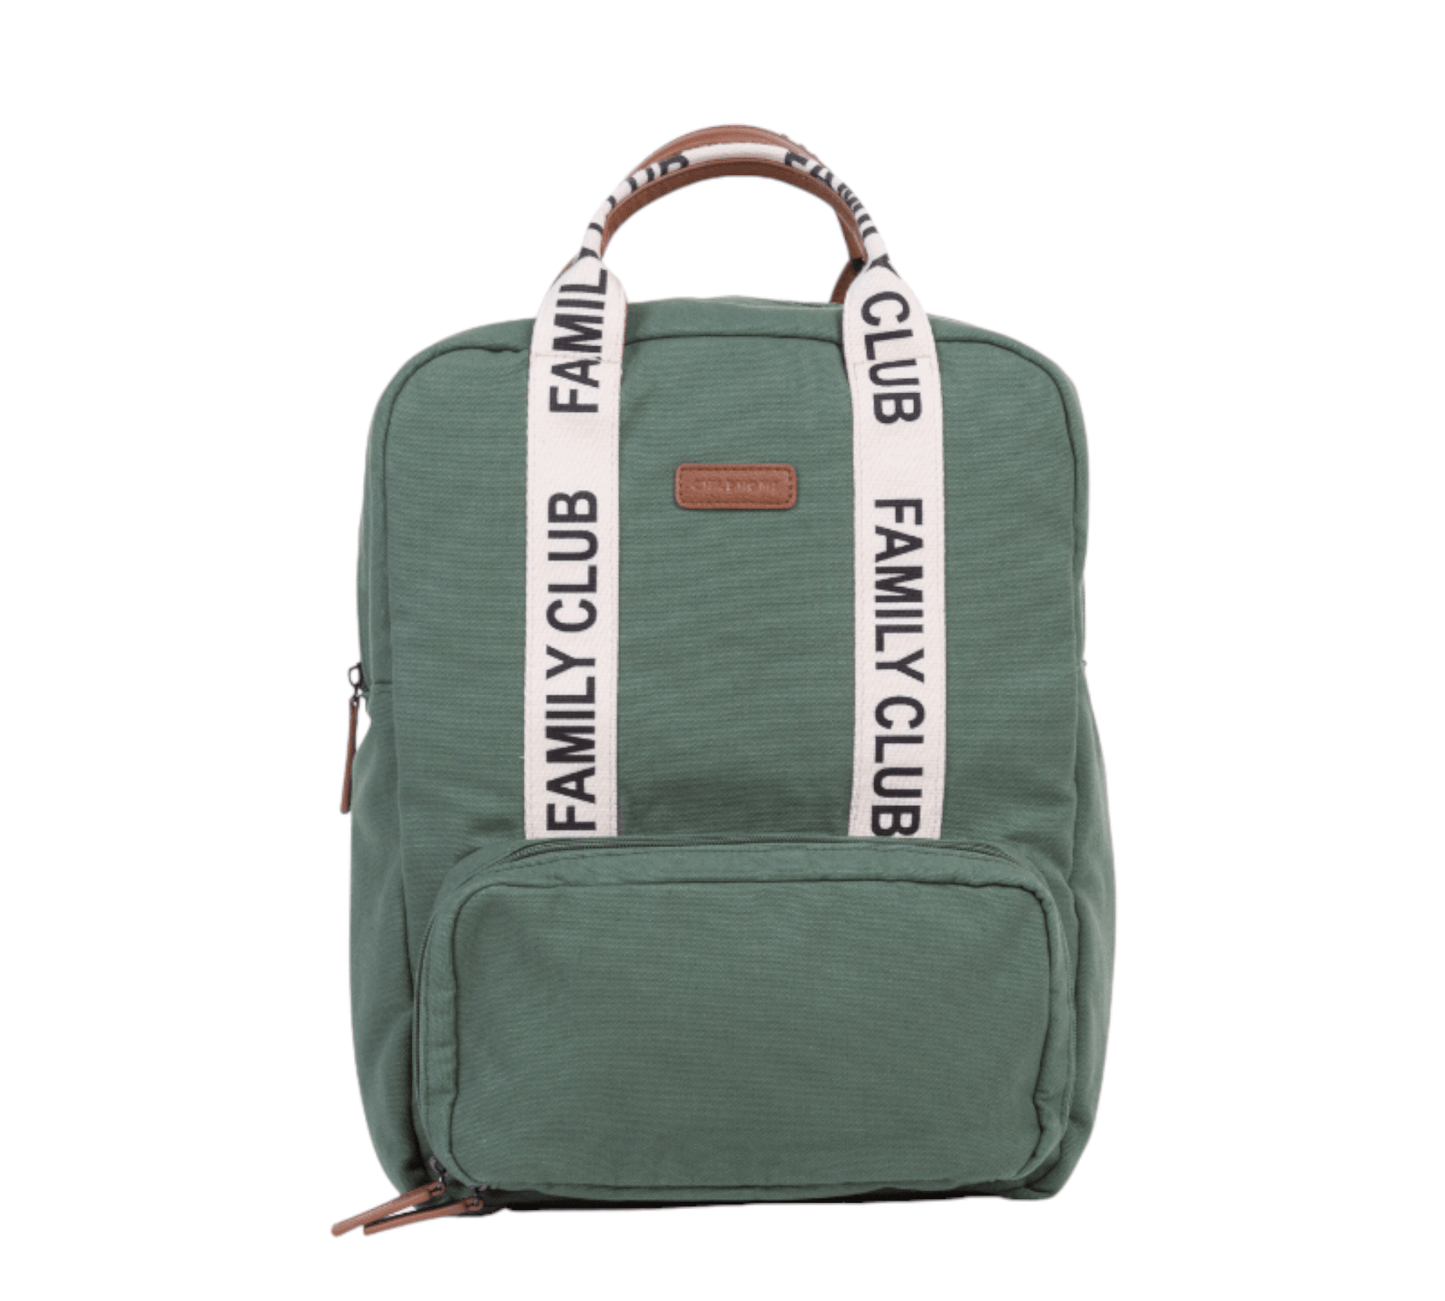 CHILDHOME Family Club Rucksack "Green" - Siliblu Boutique & Atelier